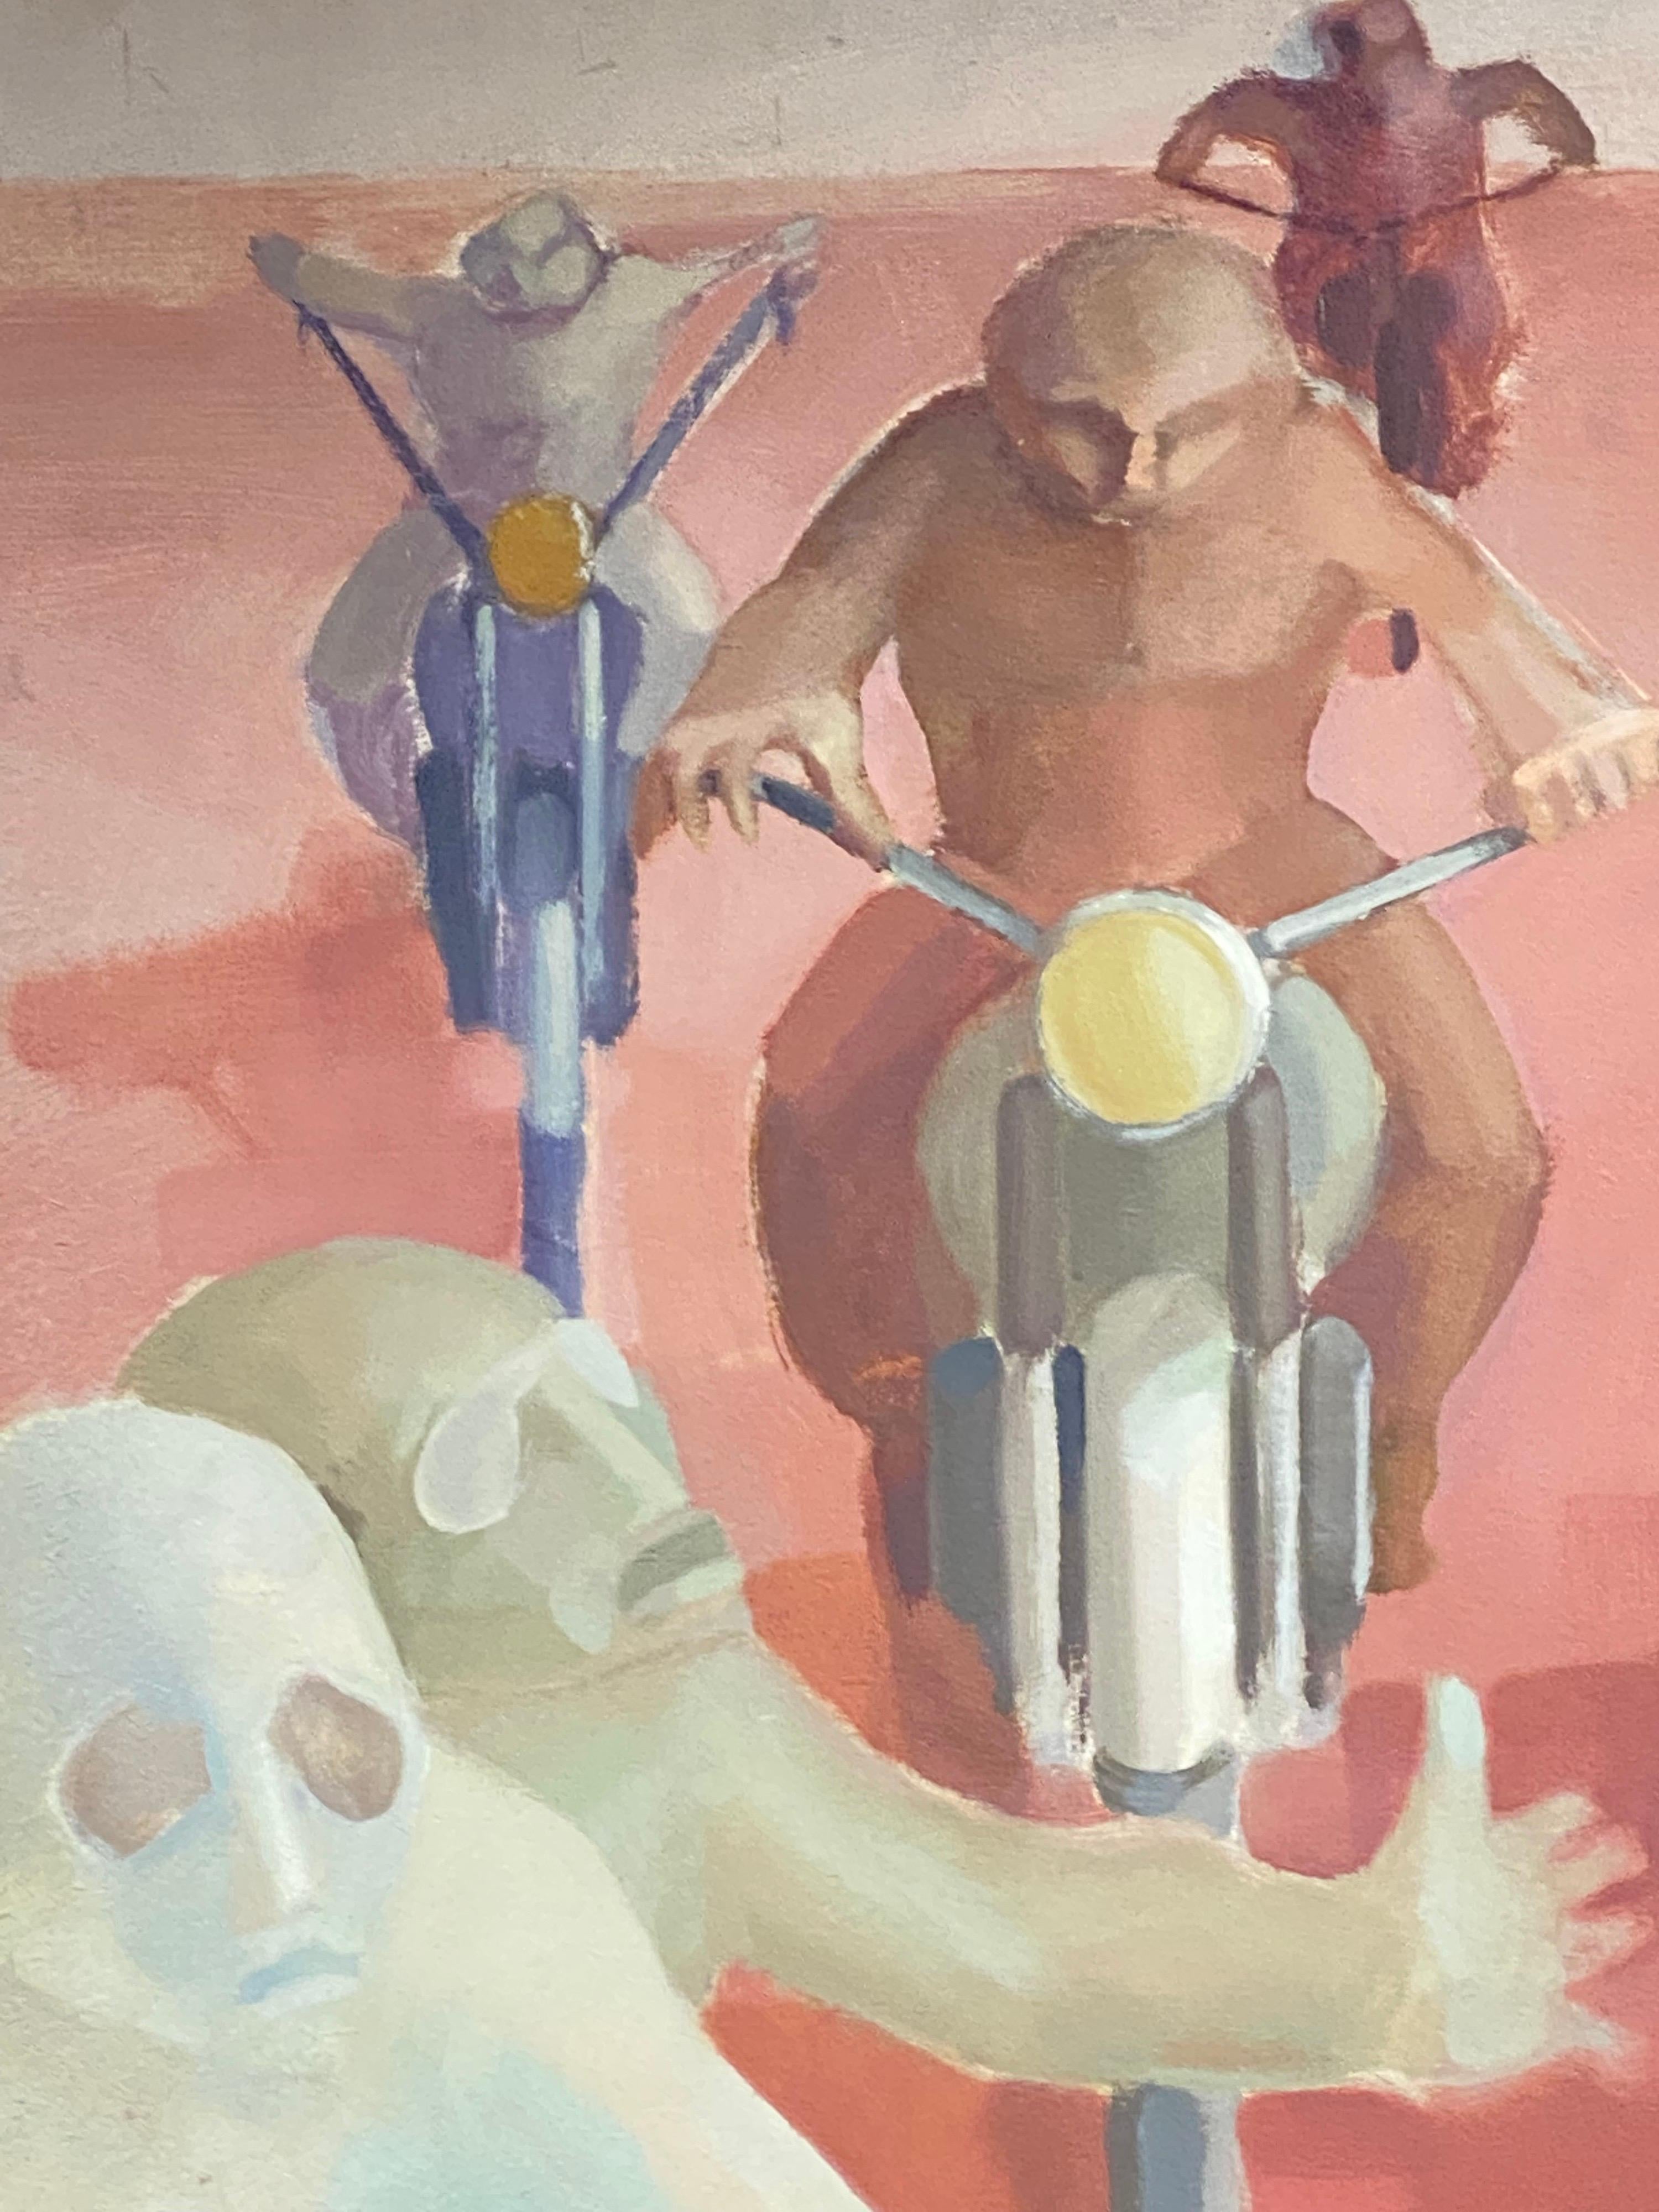 Male Bikers in Desert - Huge French Surrealist Oil Painting Figurative Scene  - Brown Abstract Painting by Andres